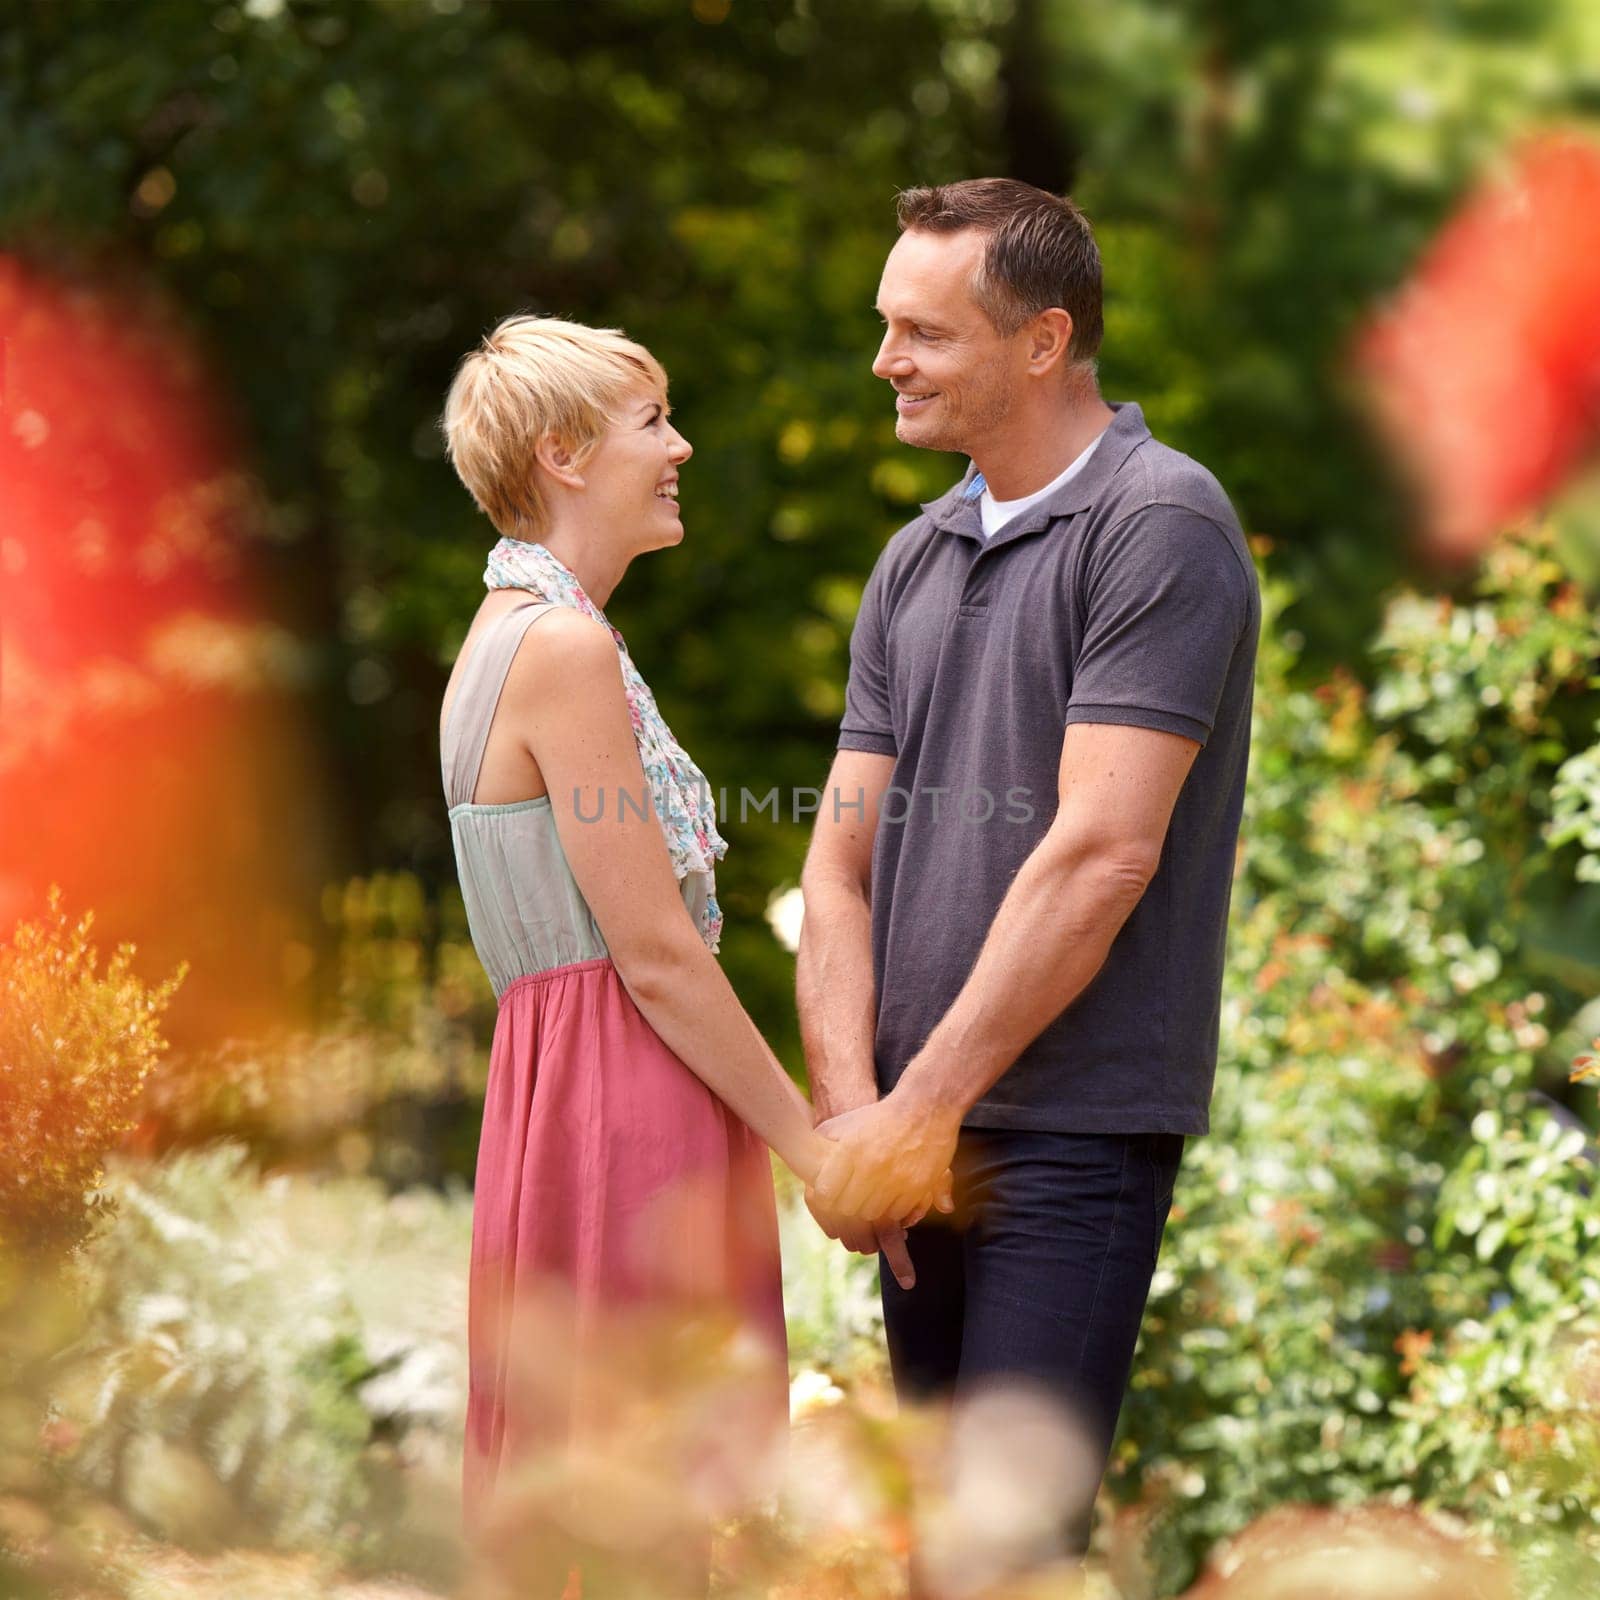 Happy, holding hands and couple in a park with love, trust and support, solidarity and security while bonding in nature. Commitment, care and people on a field of flowers for spring romance or date.